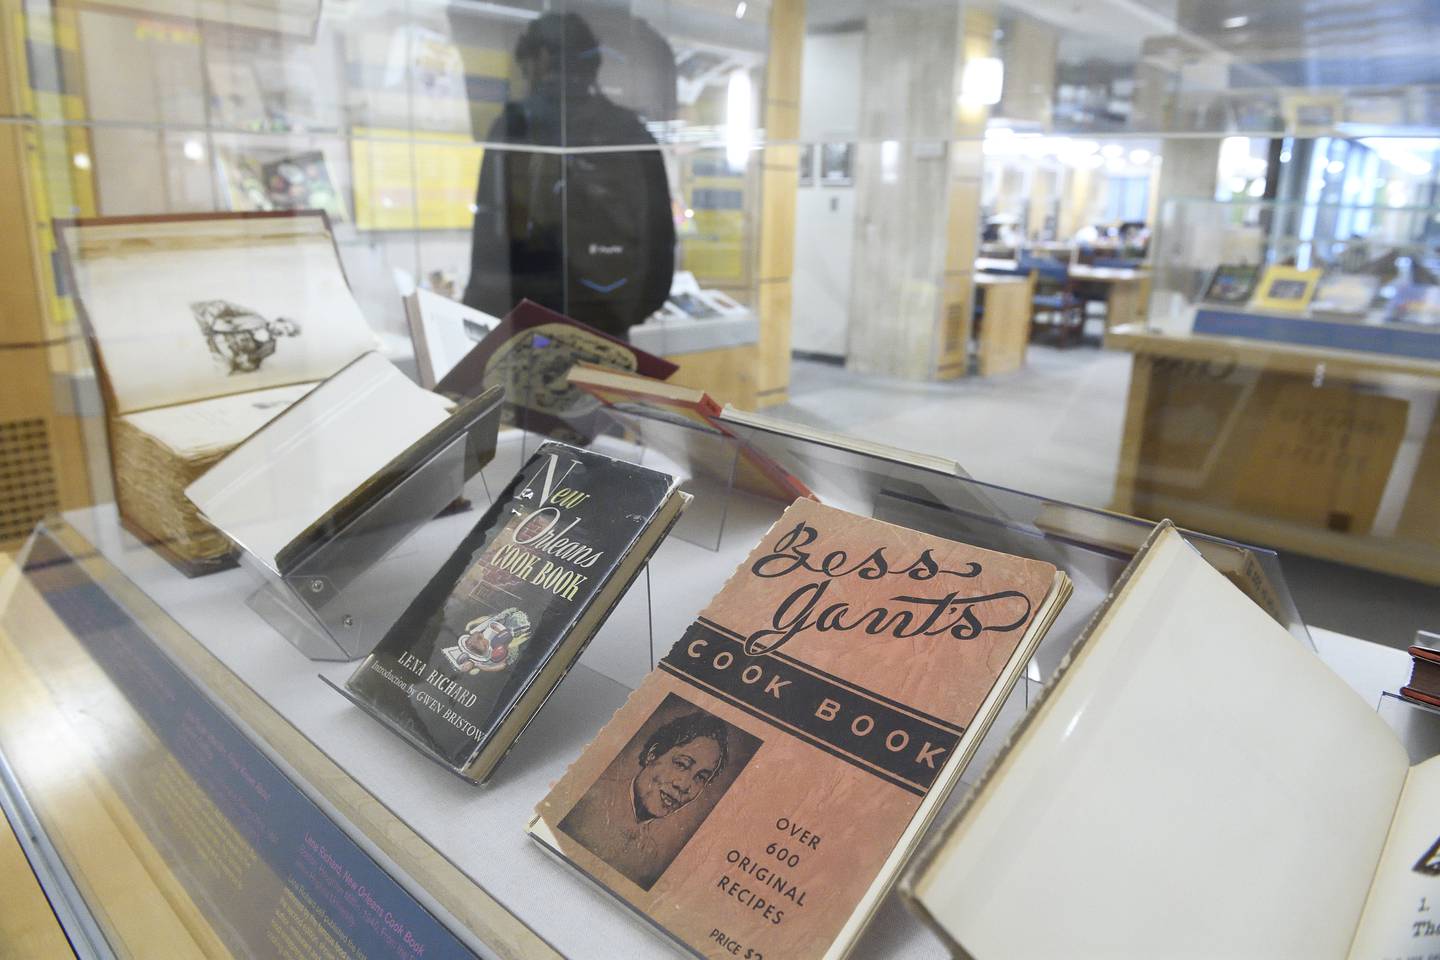 Cookbooks from the collections of Toni Tipton-Martin and W. Paul Coates are on display at Johns Hopkins Eisenhower Library.